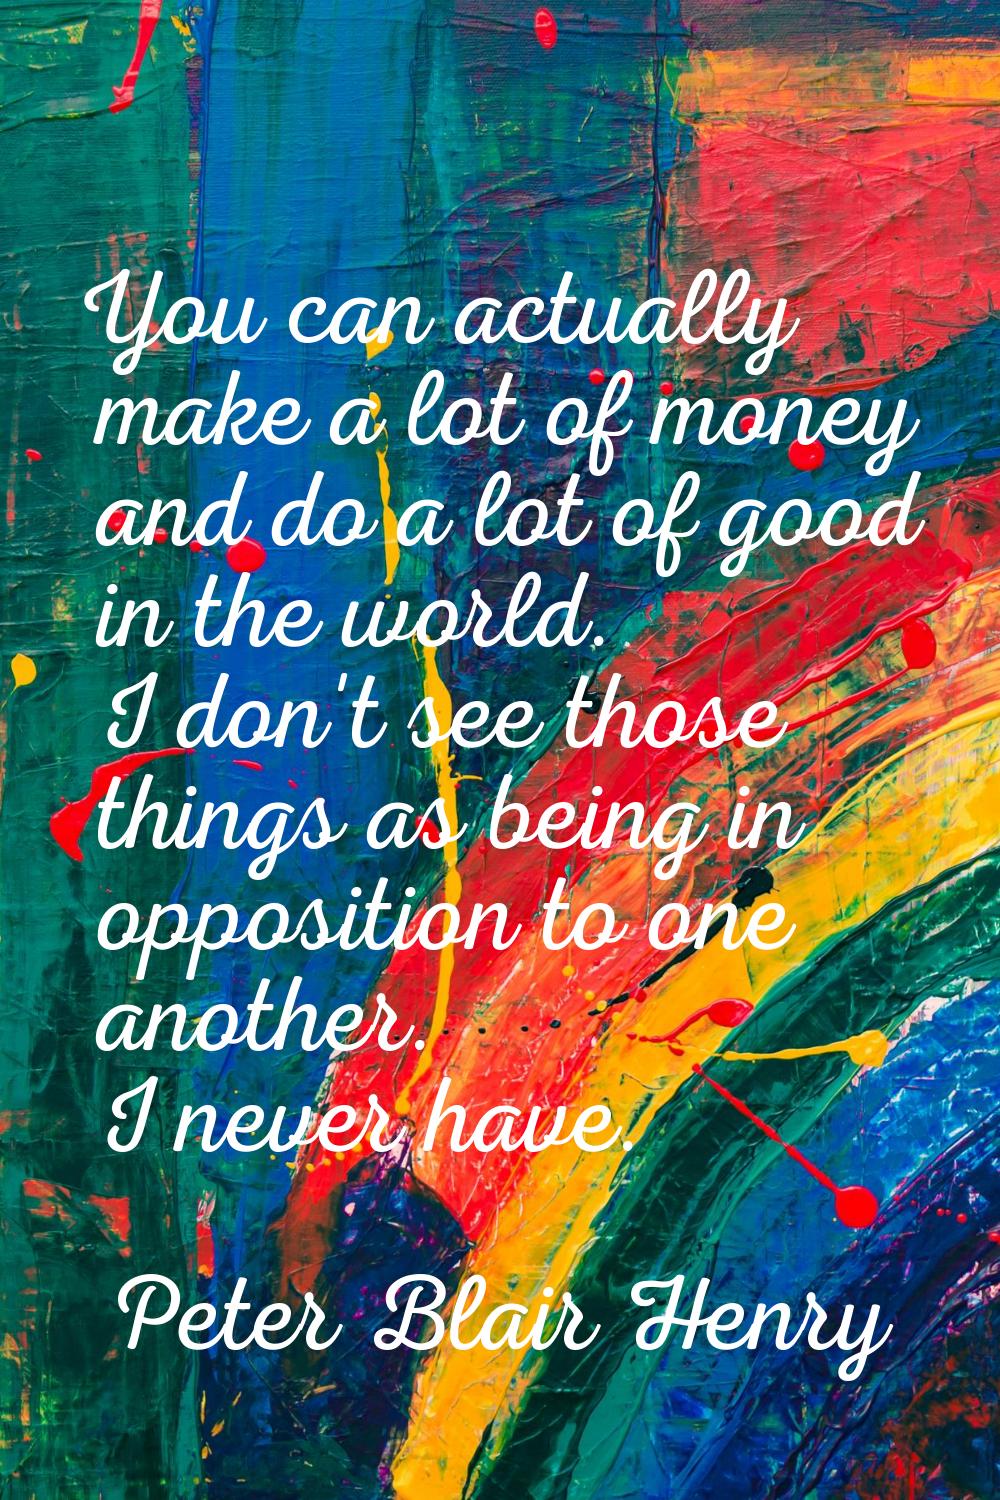 You can actually make a lot of money and do a lot of good in the world. I don't see those things as